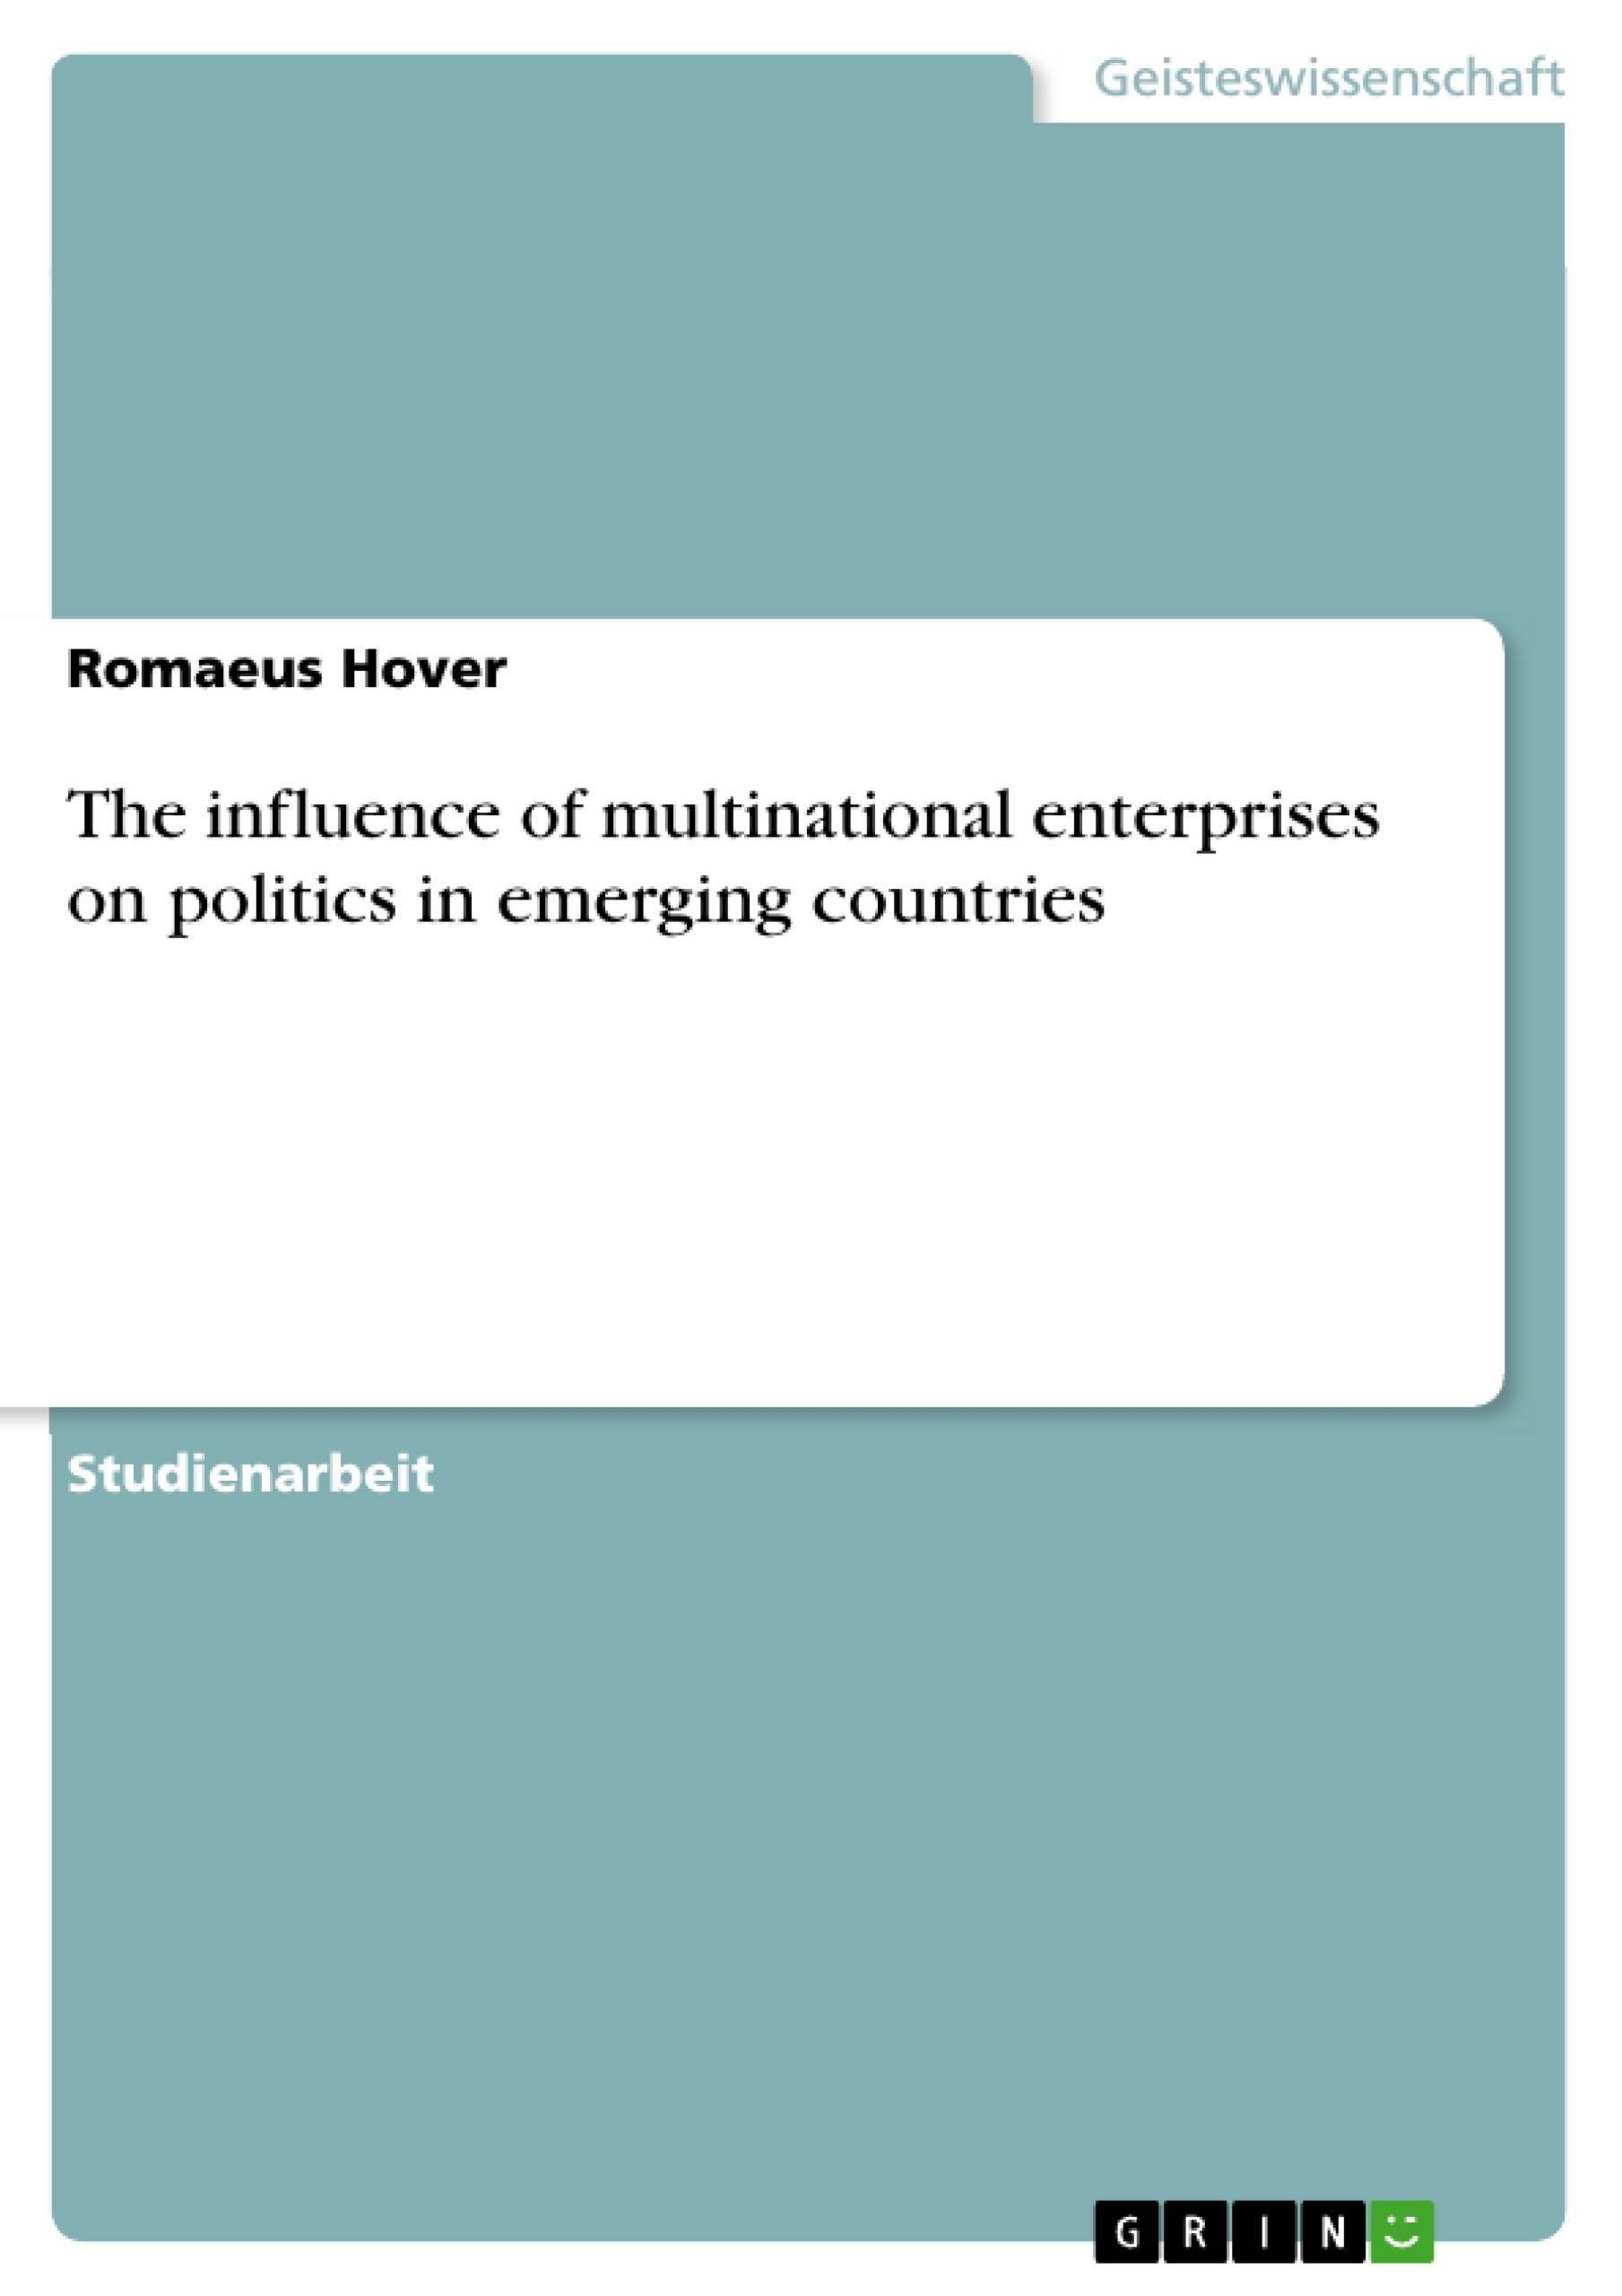 Title: The influence of multinational enterprises on politics in emerging countries